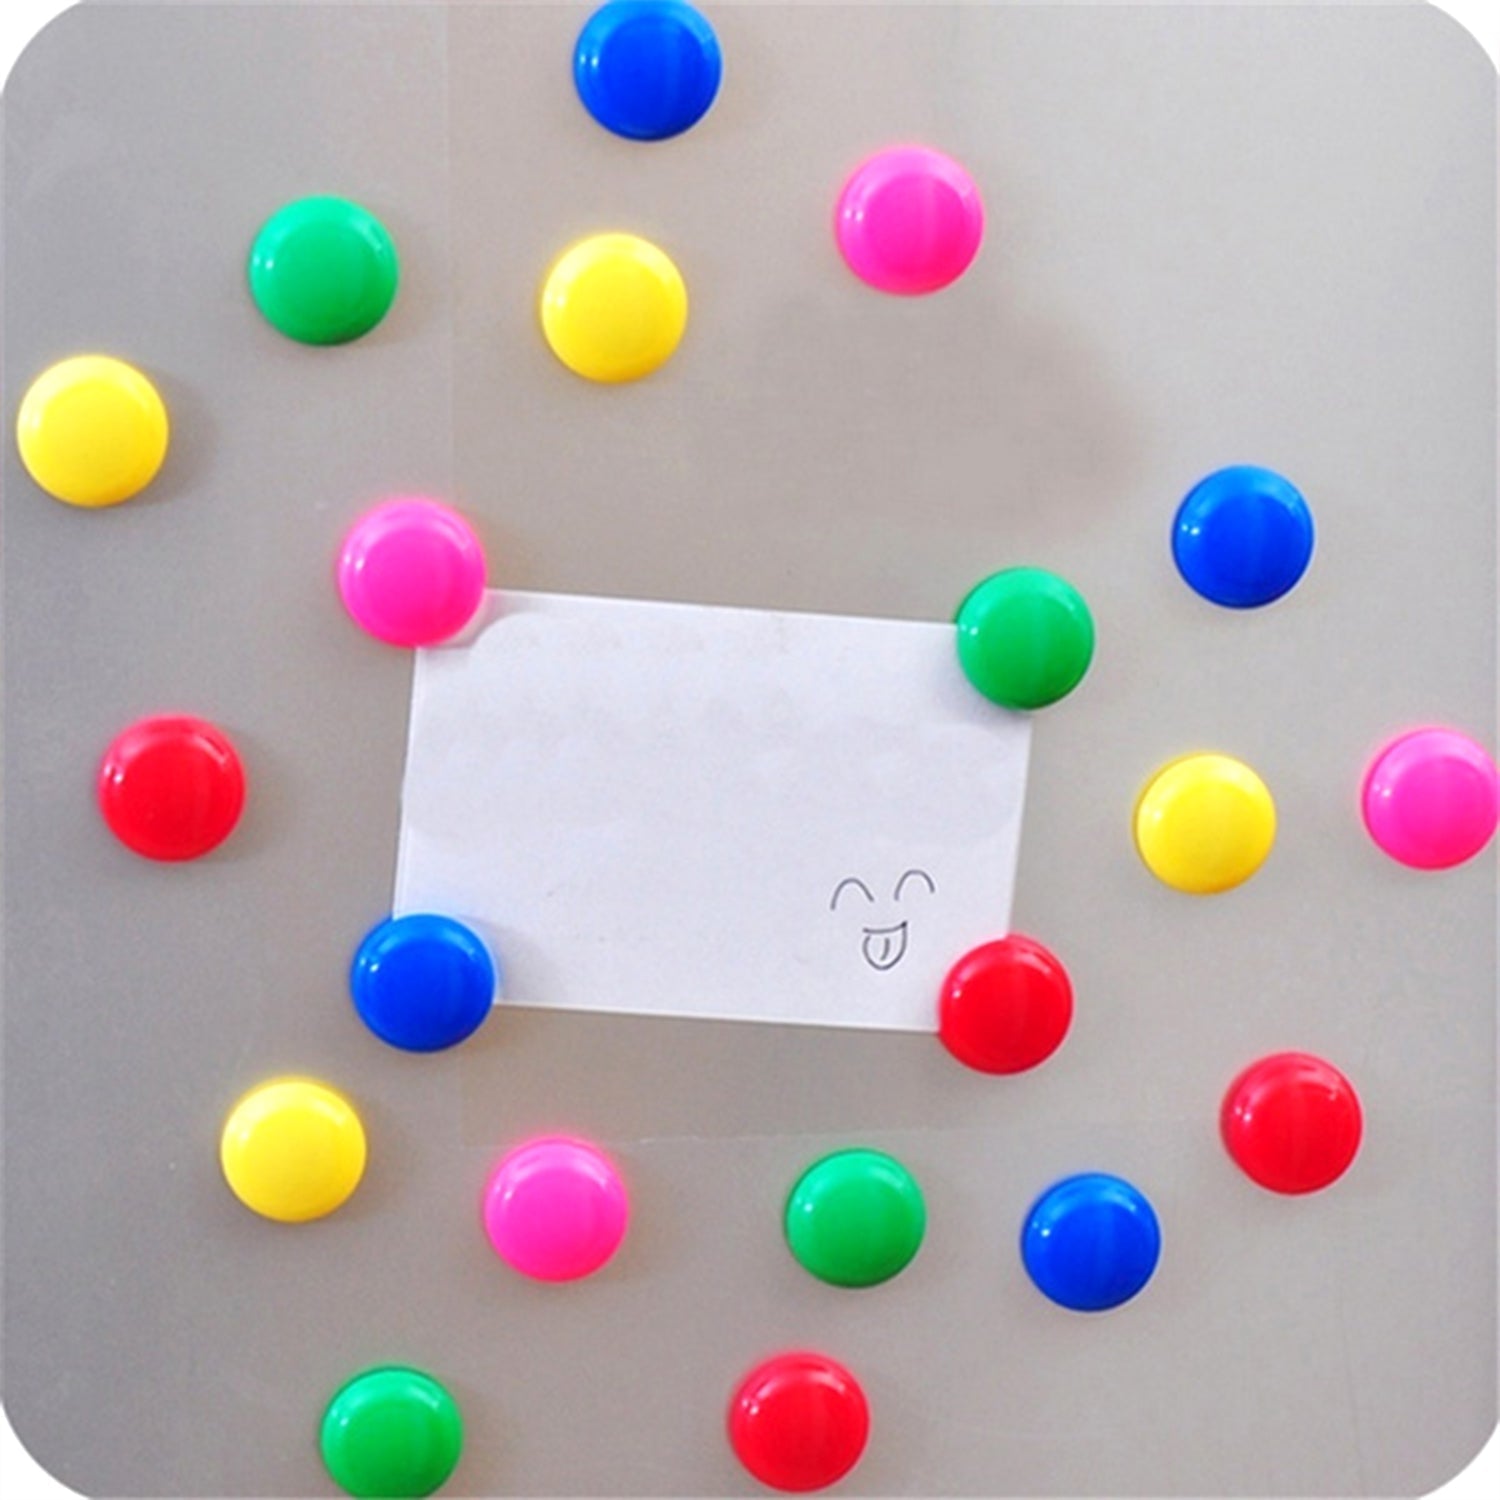 4676 Colorful Board Magnets Circular Plastic Buttons DeoDap